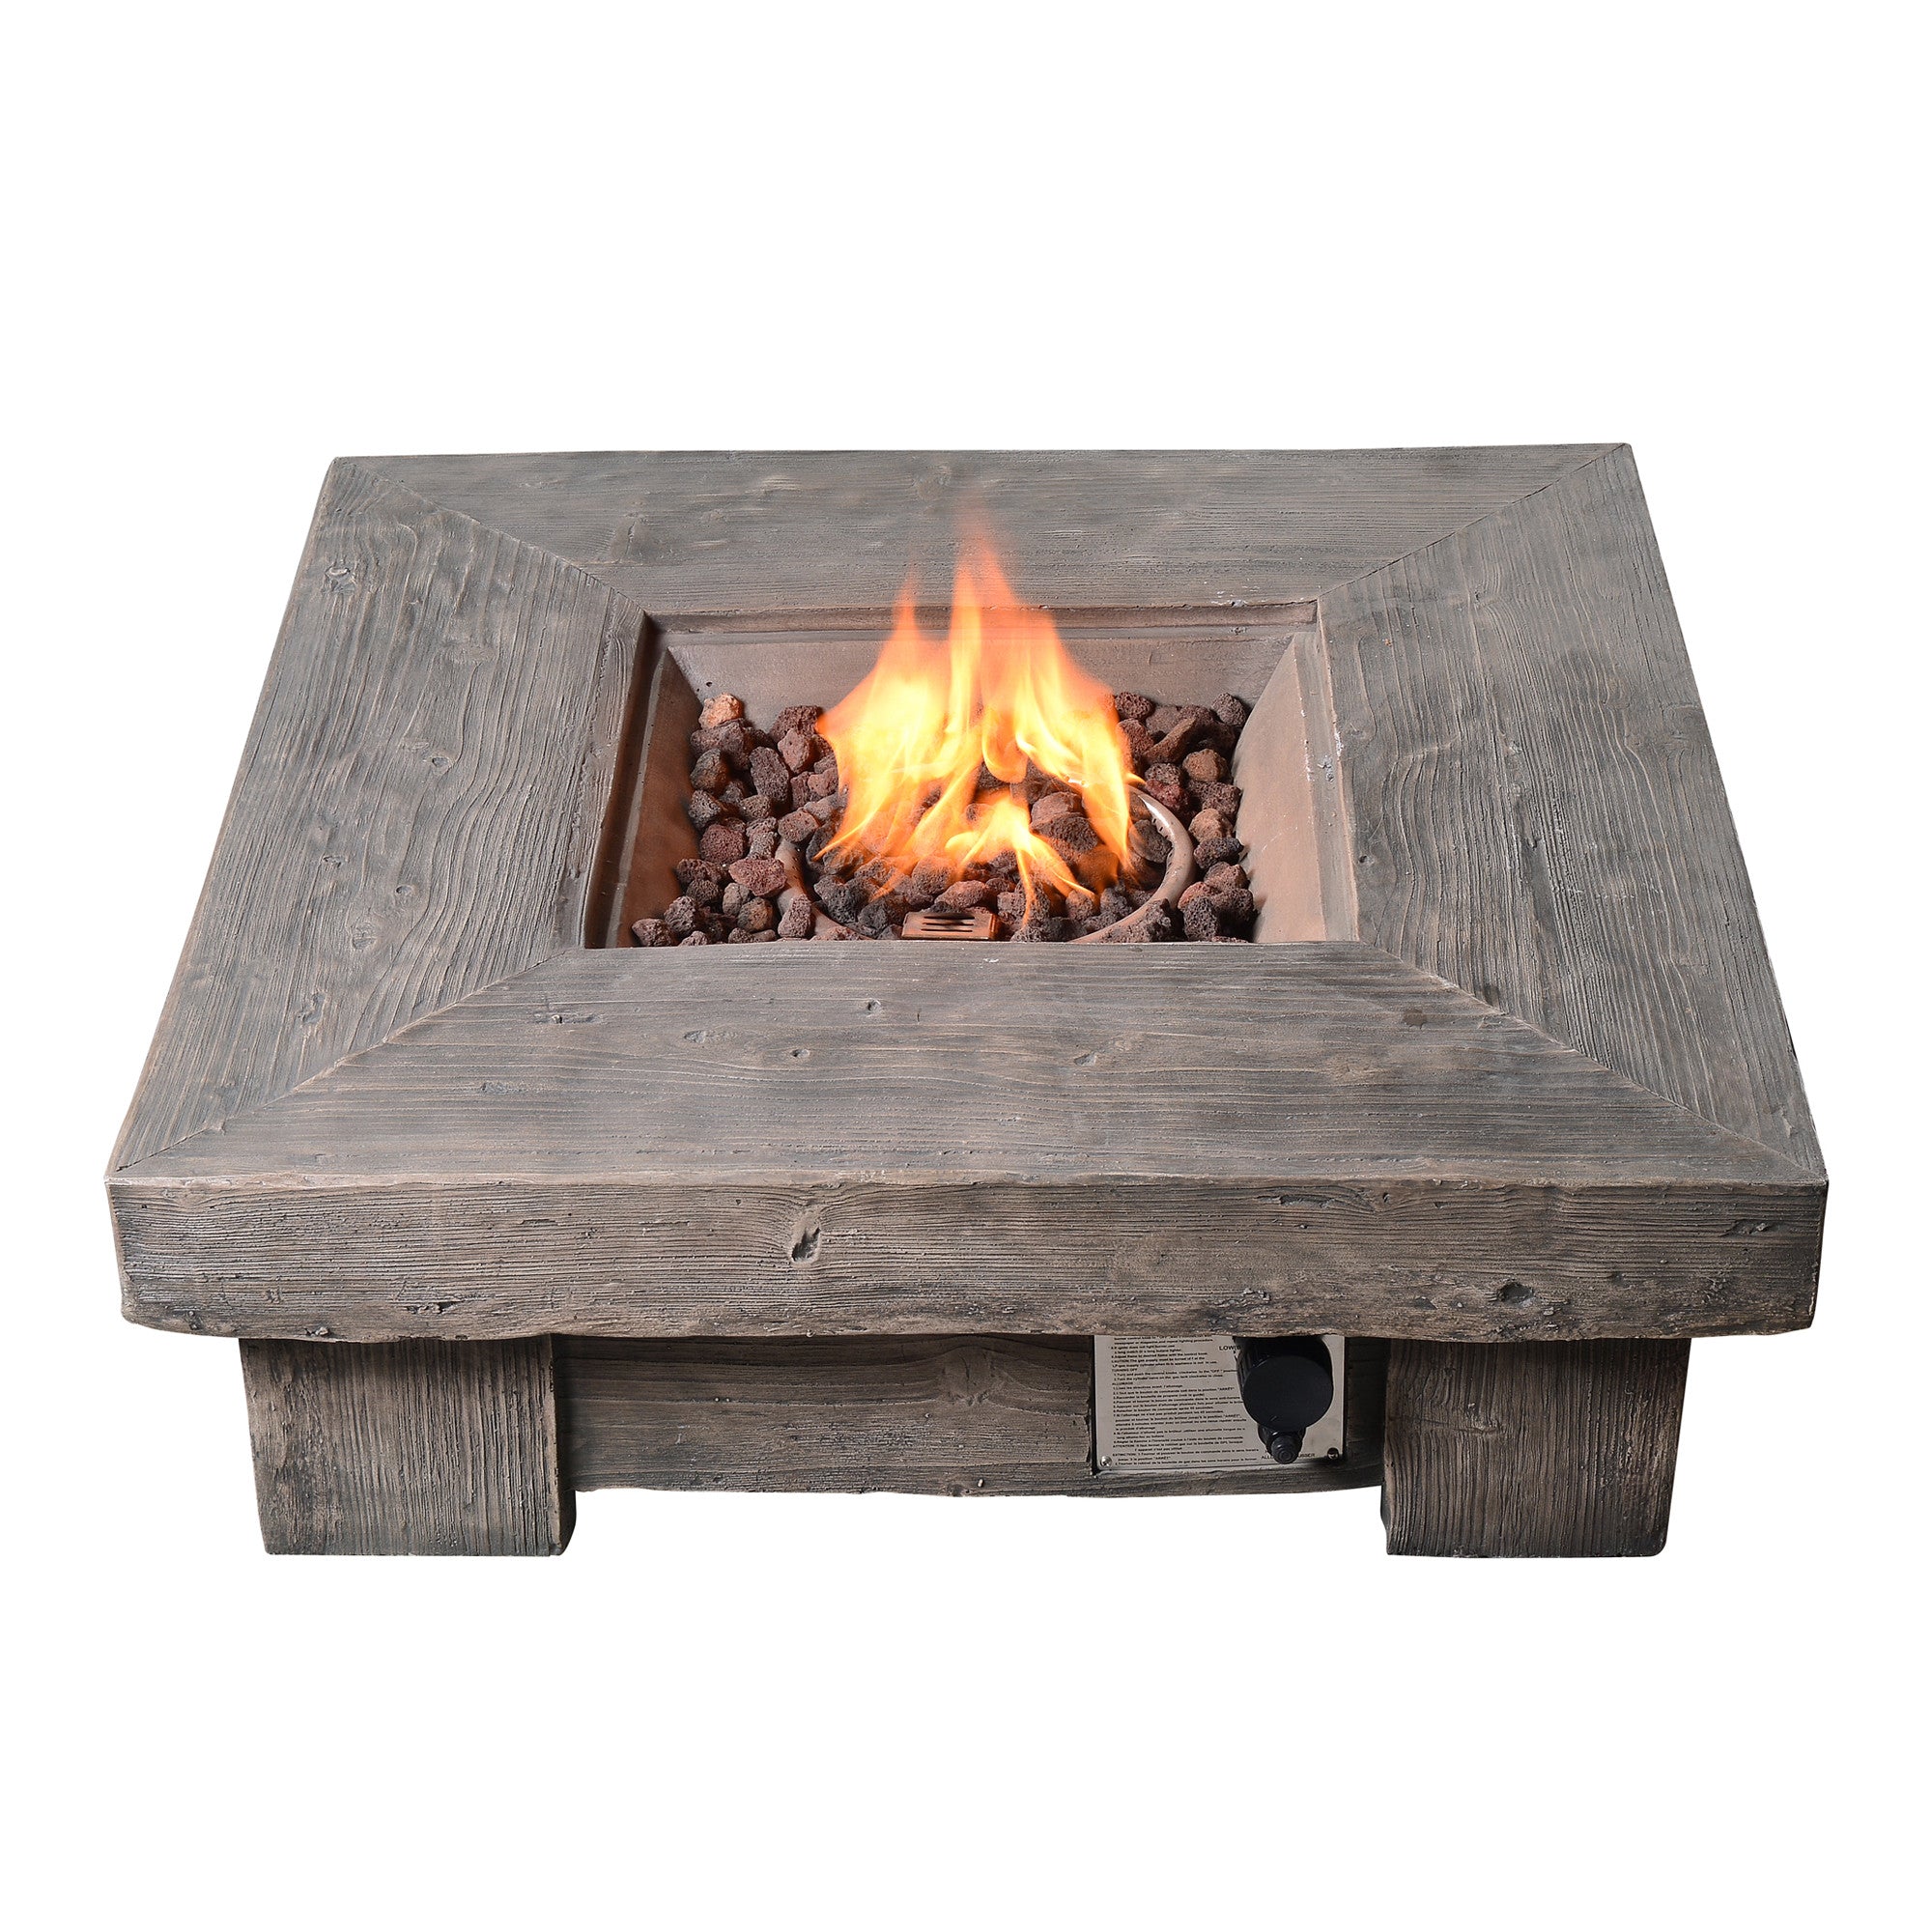 Teamson Home 35" Square Retro Wood Look Gas Fire Pit